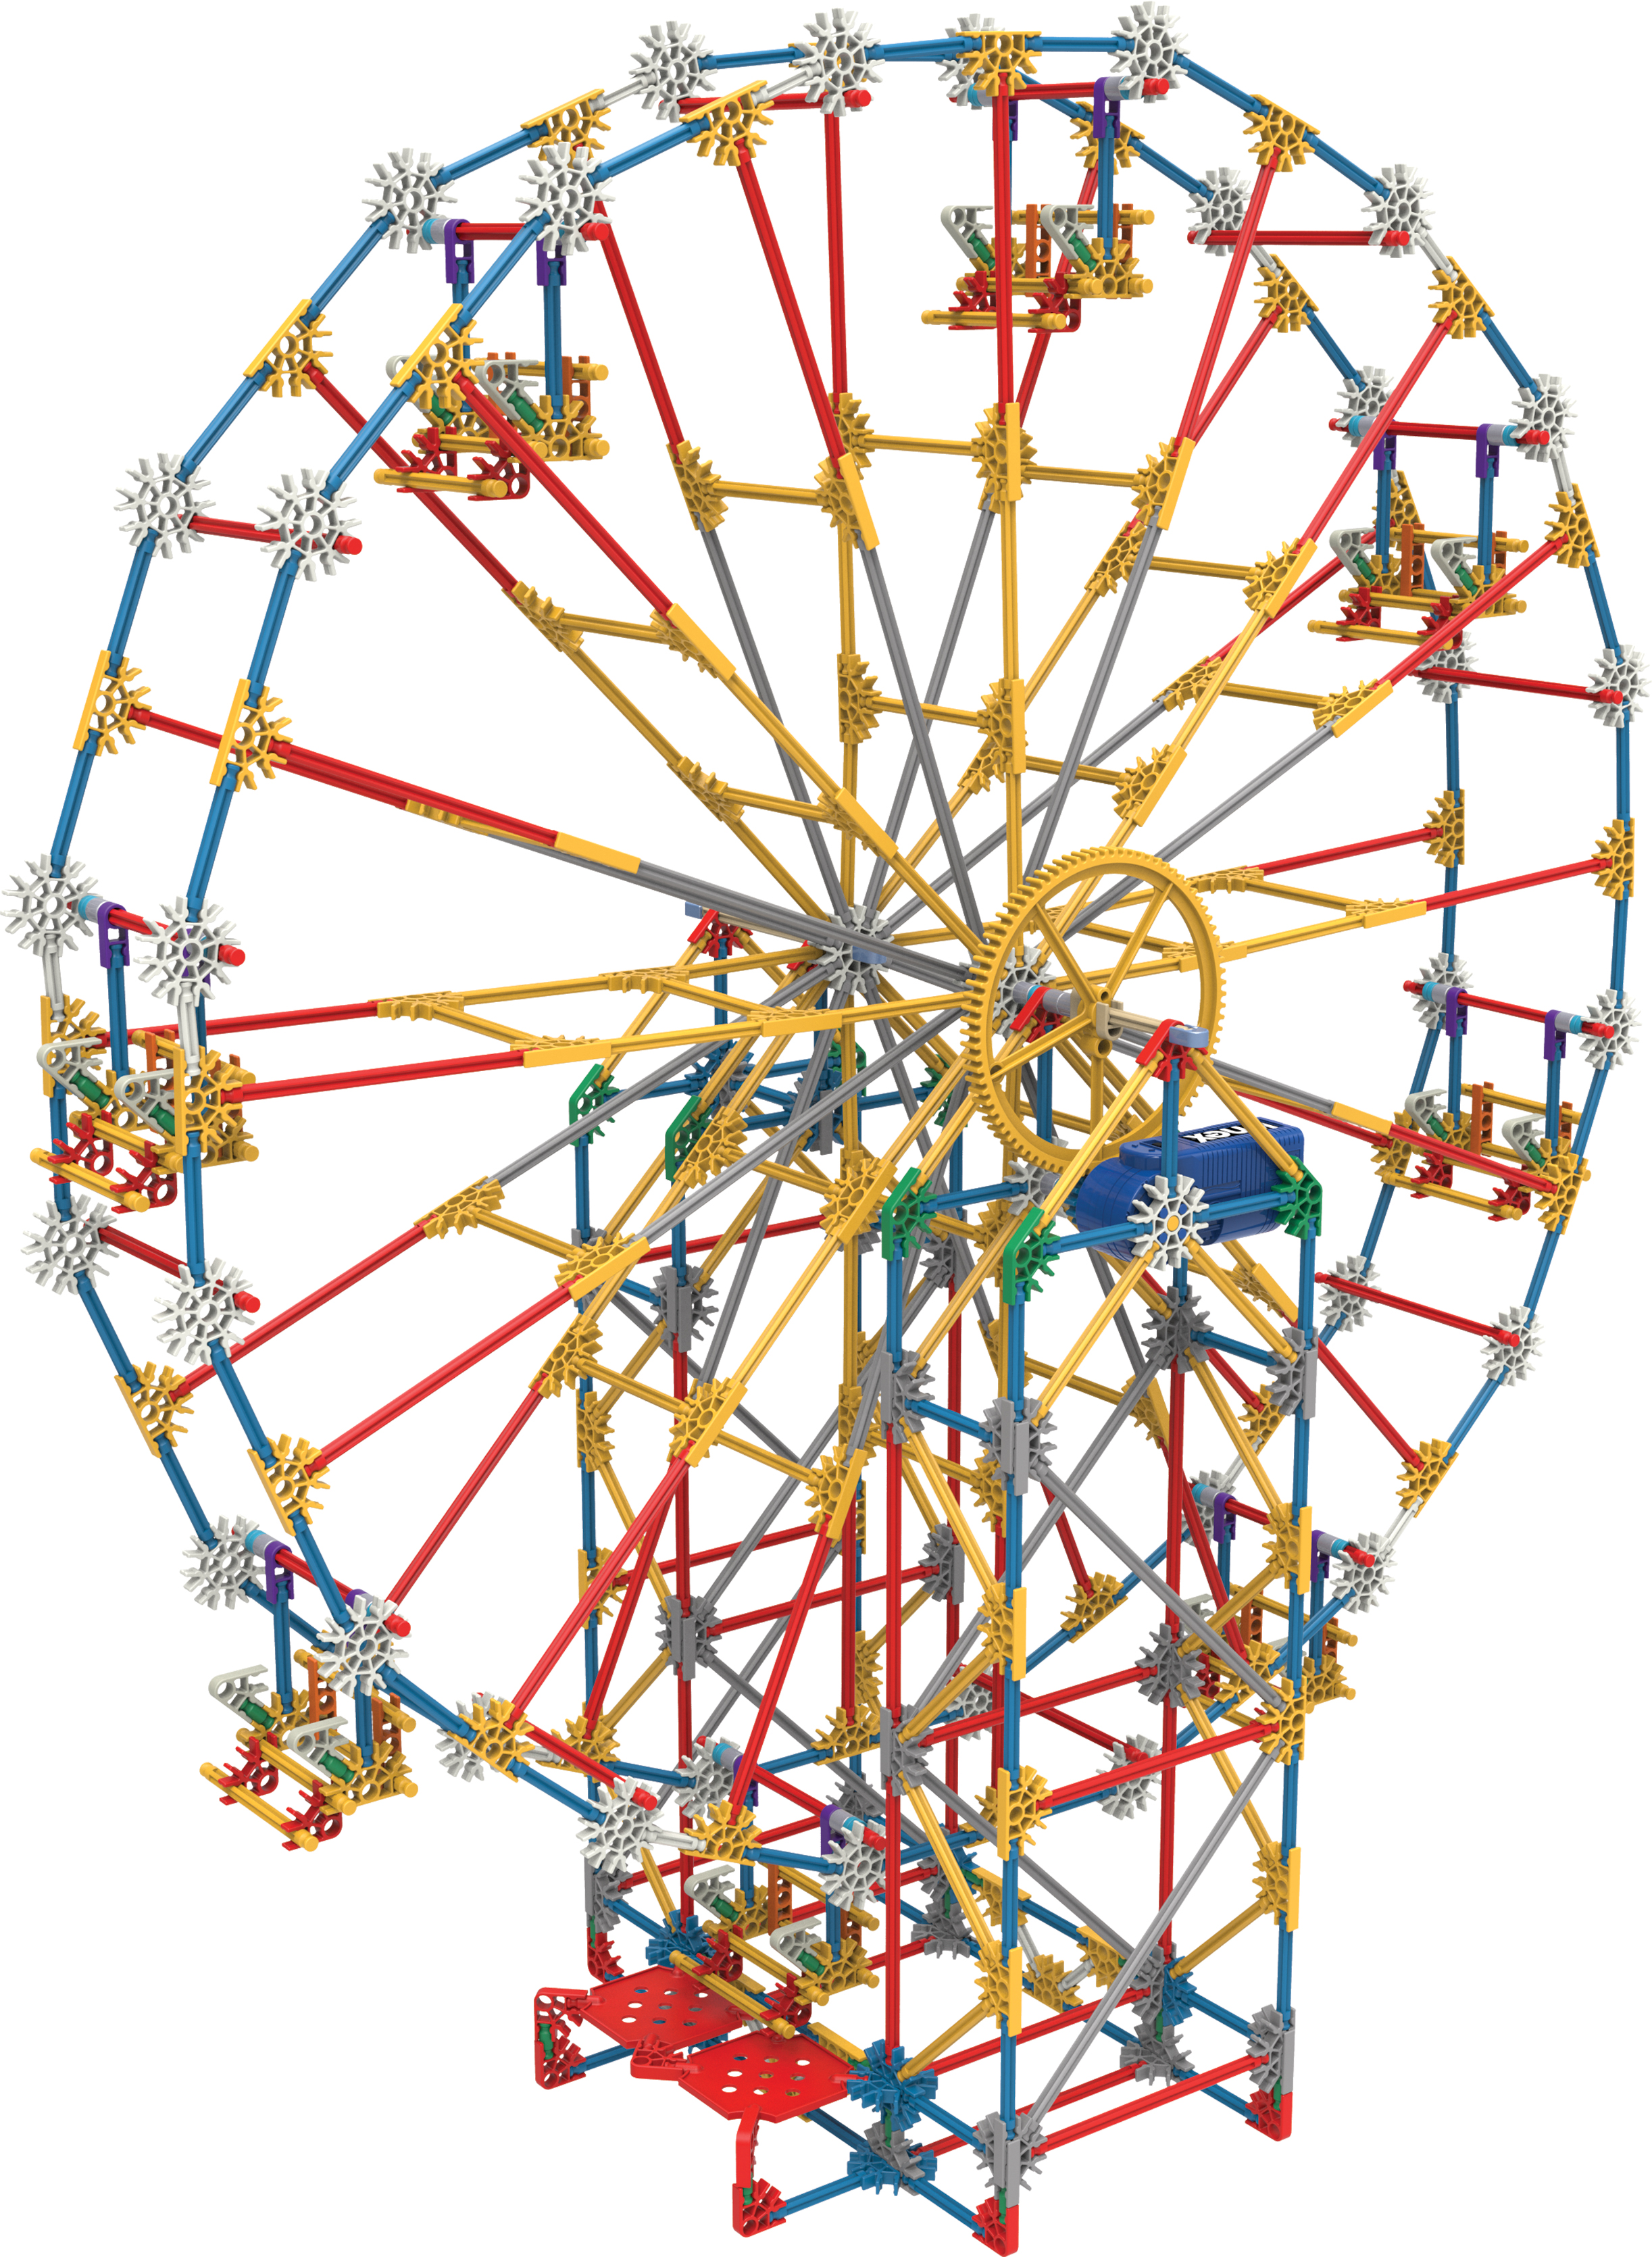 K'NEX Thrill Rides - 3-in-1 Classic Amusement Park Building Set - 744 Pieces - Ages 9 Engineering Education Toy - image 5 of 6